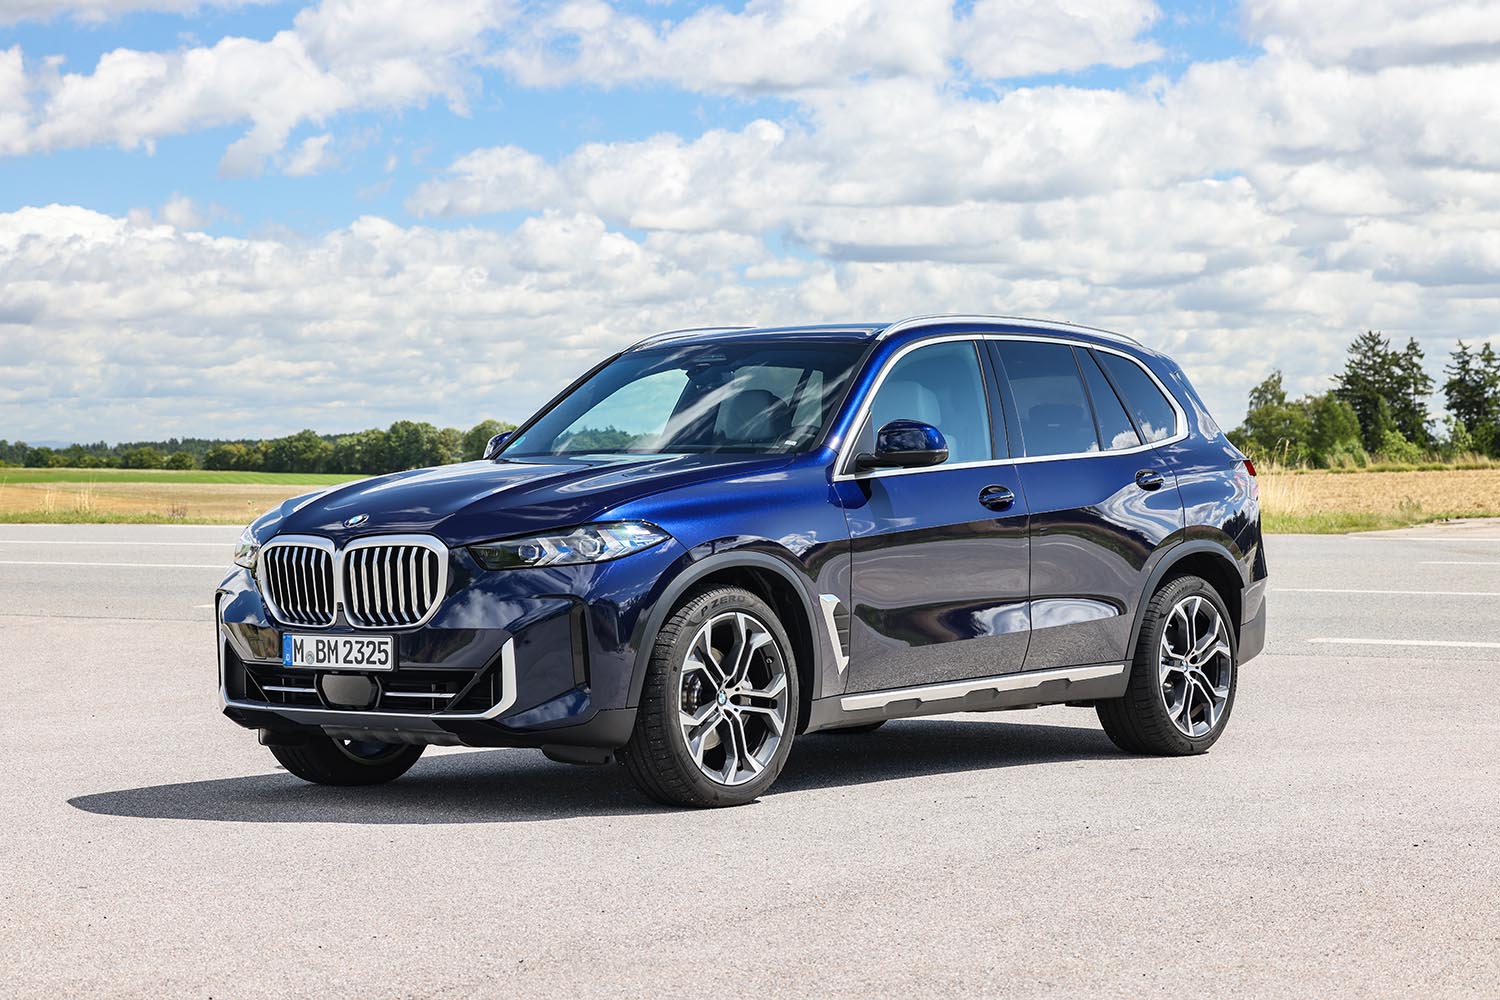 BMW X5 in blue parked in parking lot with fields and trees behind it